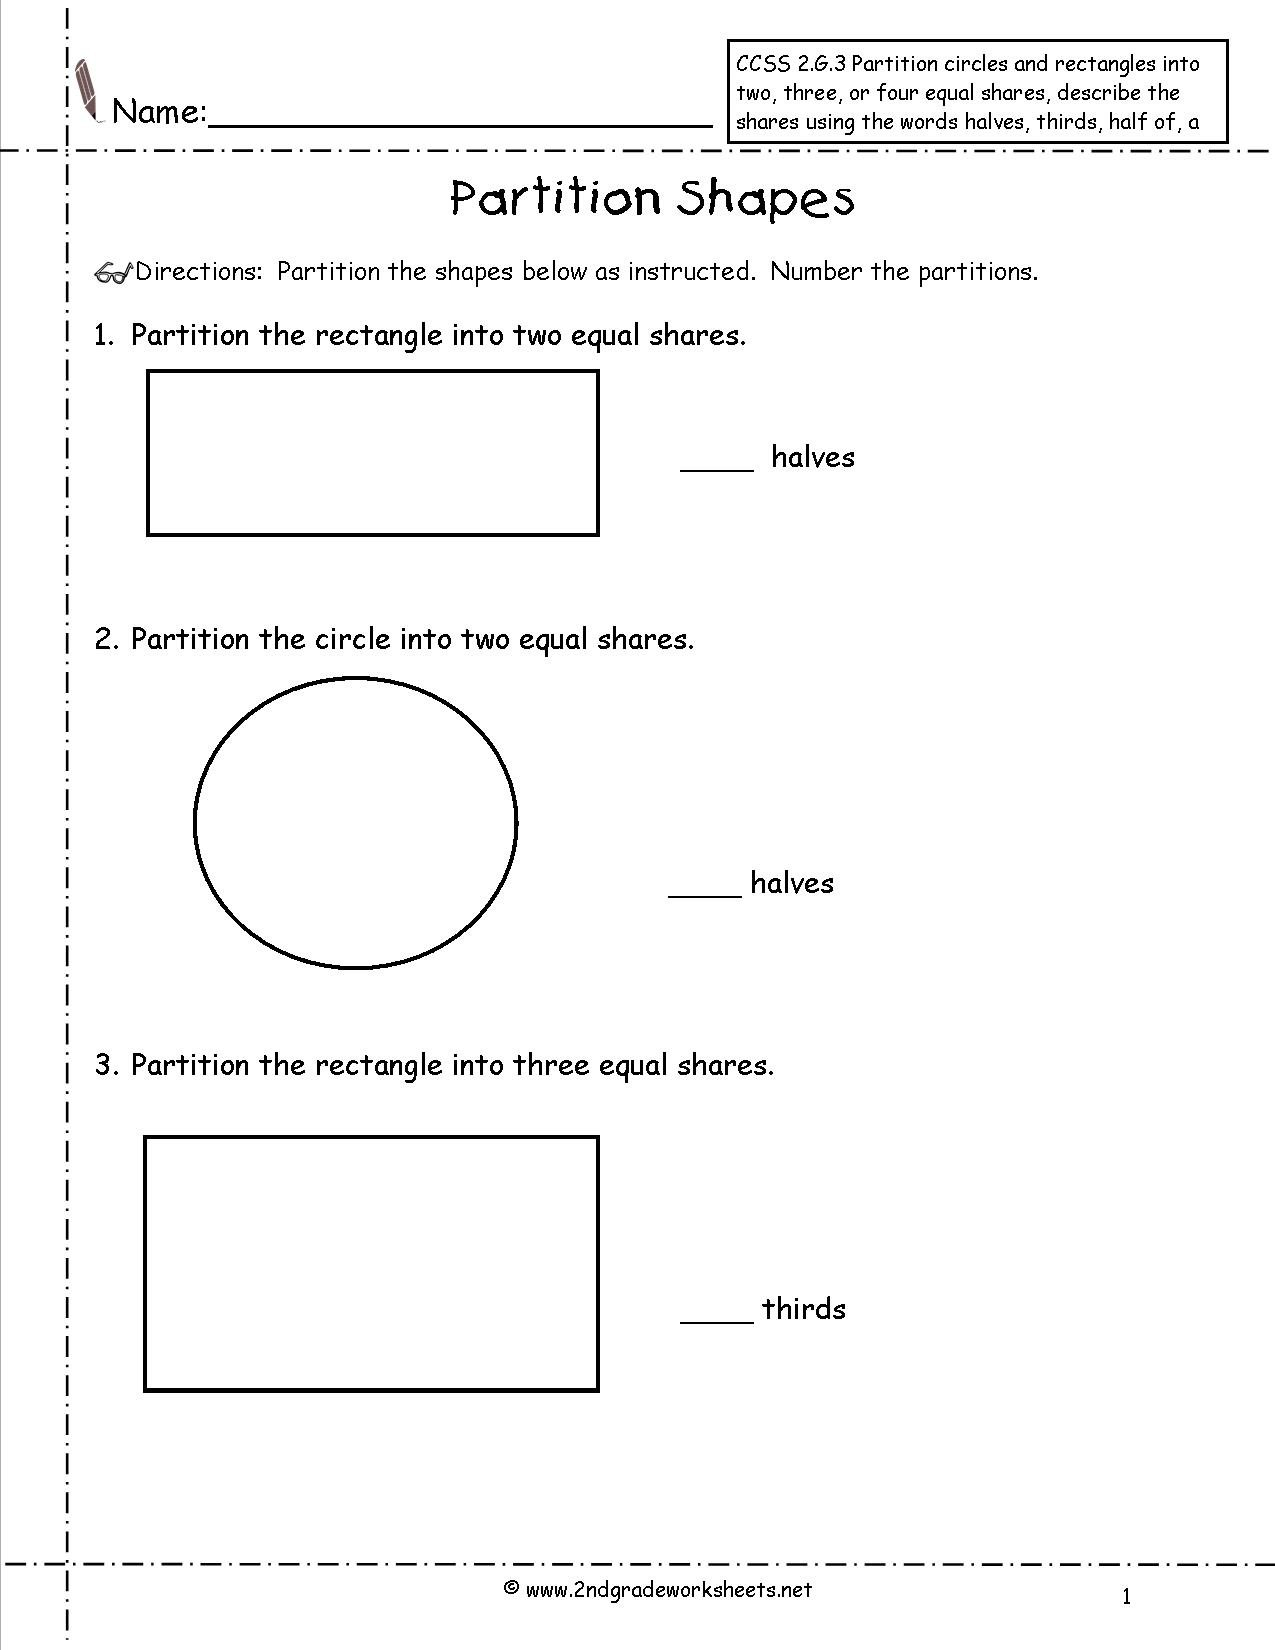 Ccss 2G3 Worksheets Partition Shapes With Dividing Shapes Into Equal Parts Worksheet